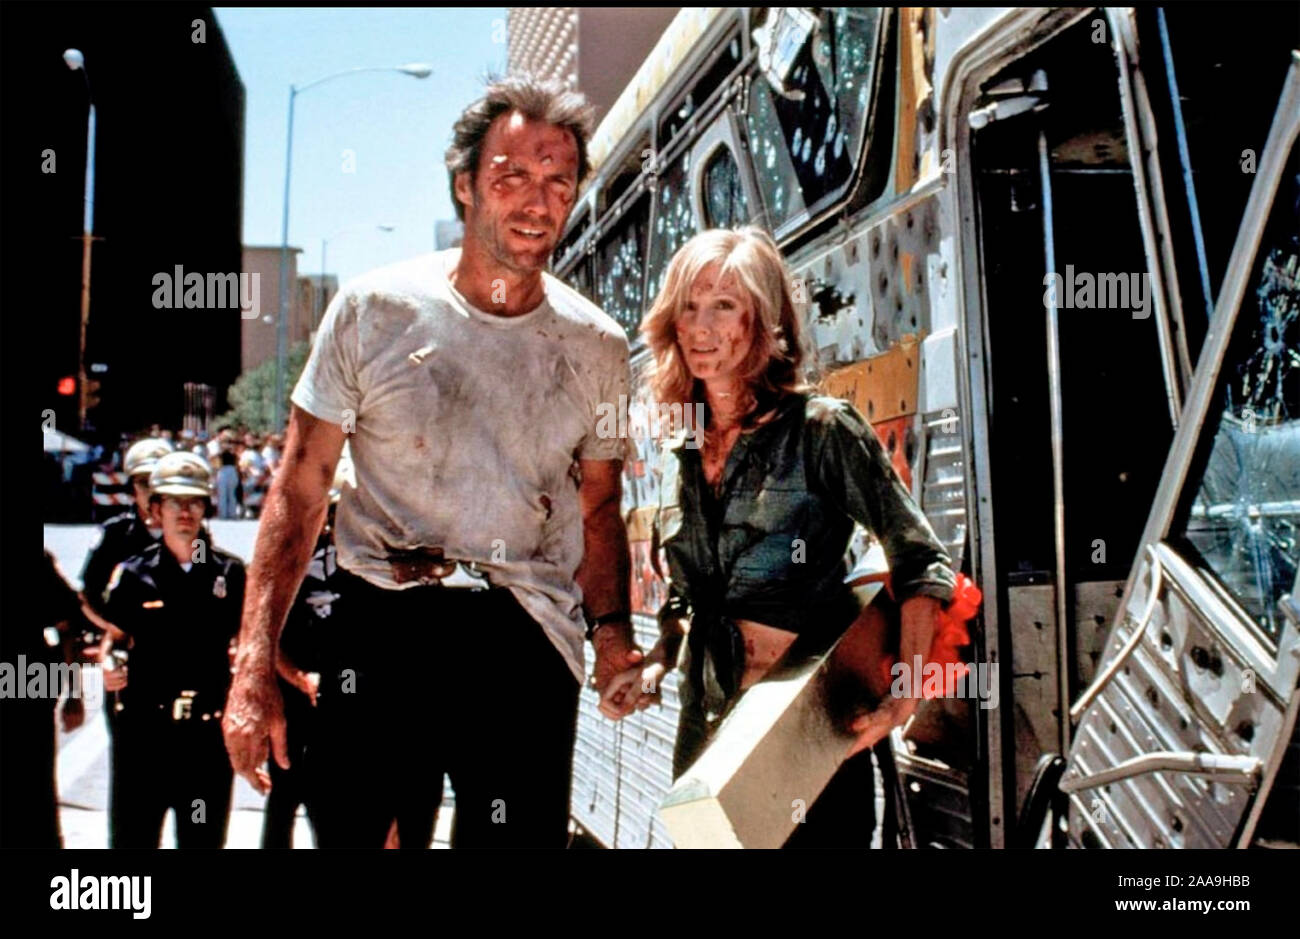 THE GAUNTLET Warner Bros Film With Clint Eastwood And Sondra Locke Stock Photo Alamy